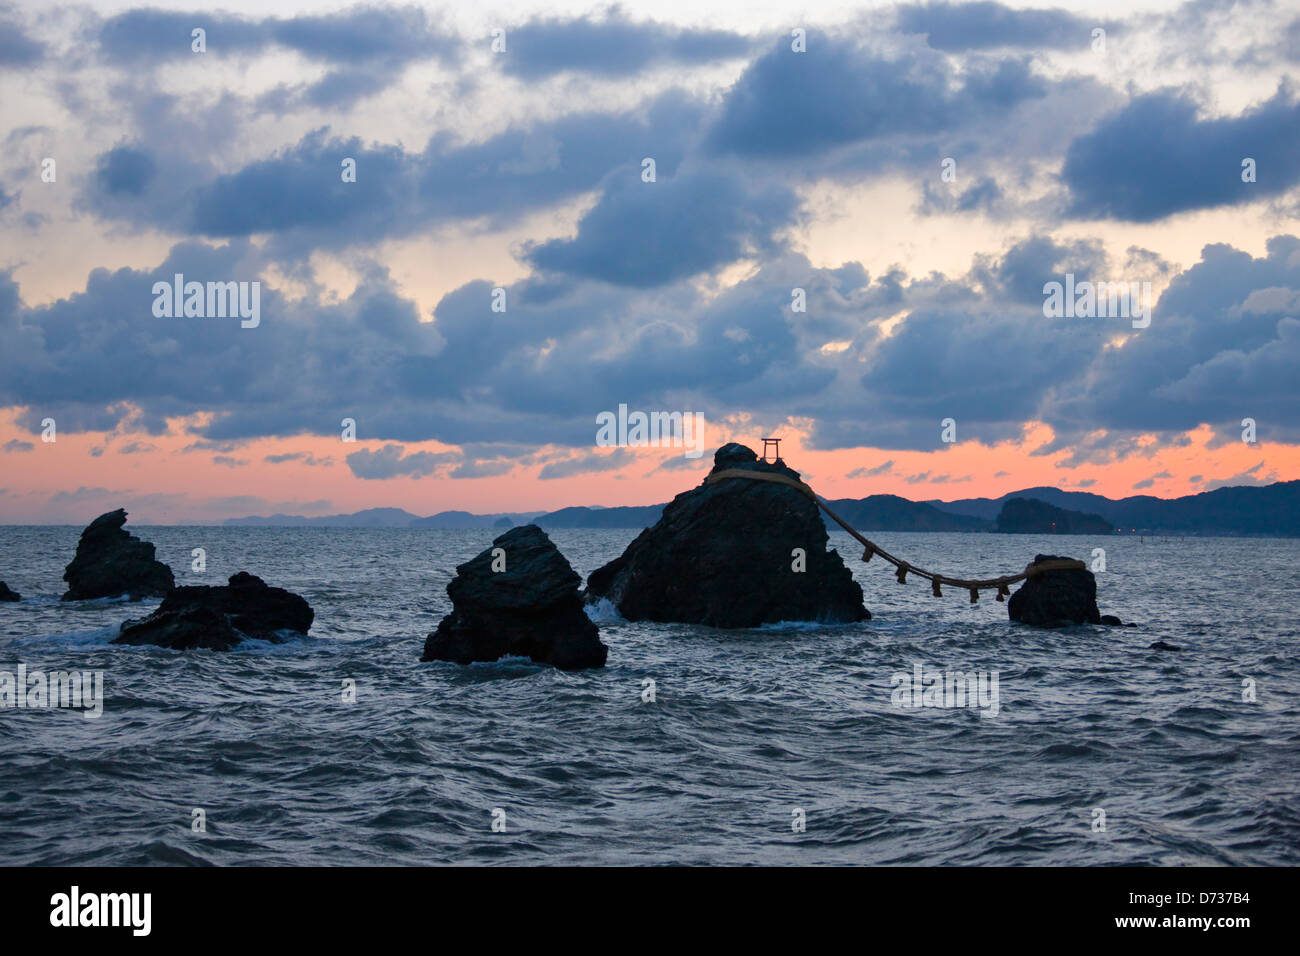 Sunset view of Meoto Iwa, Husband-and-Wife-Rocks, in the sea off Futami, Mie Prefecture, Japan Stock Photo